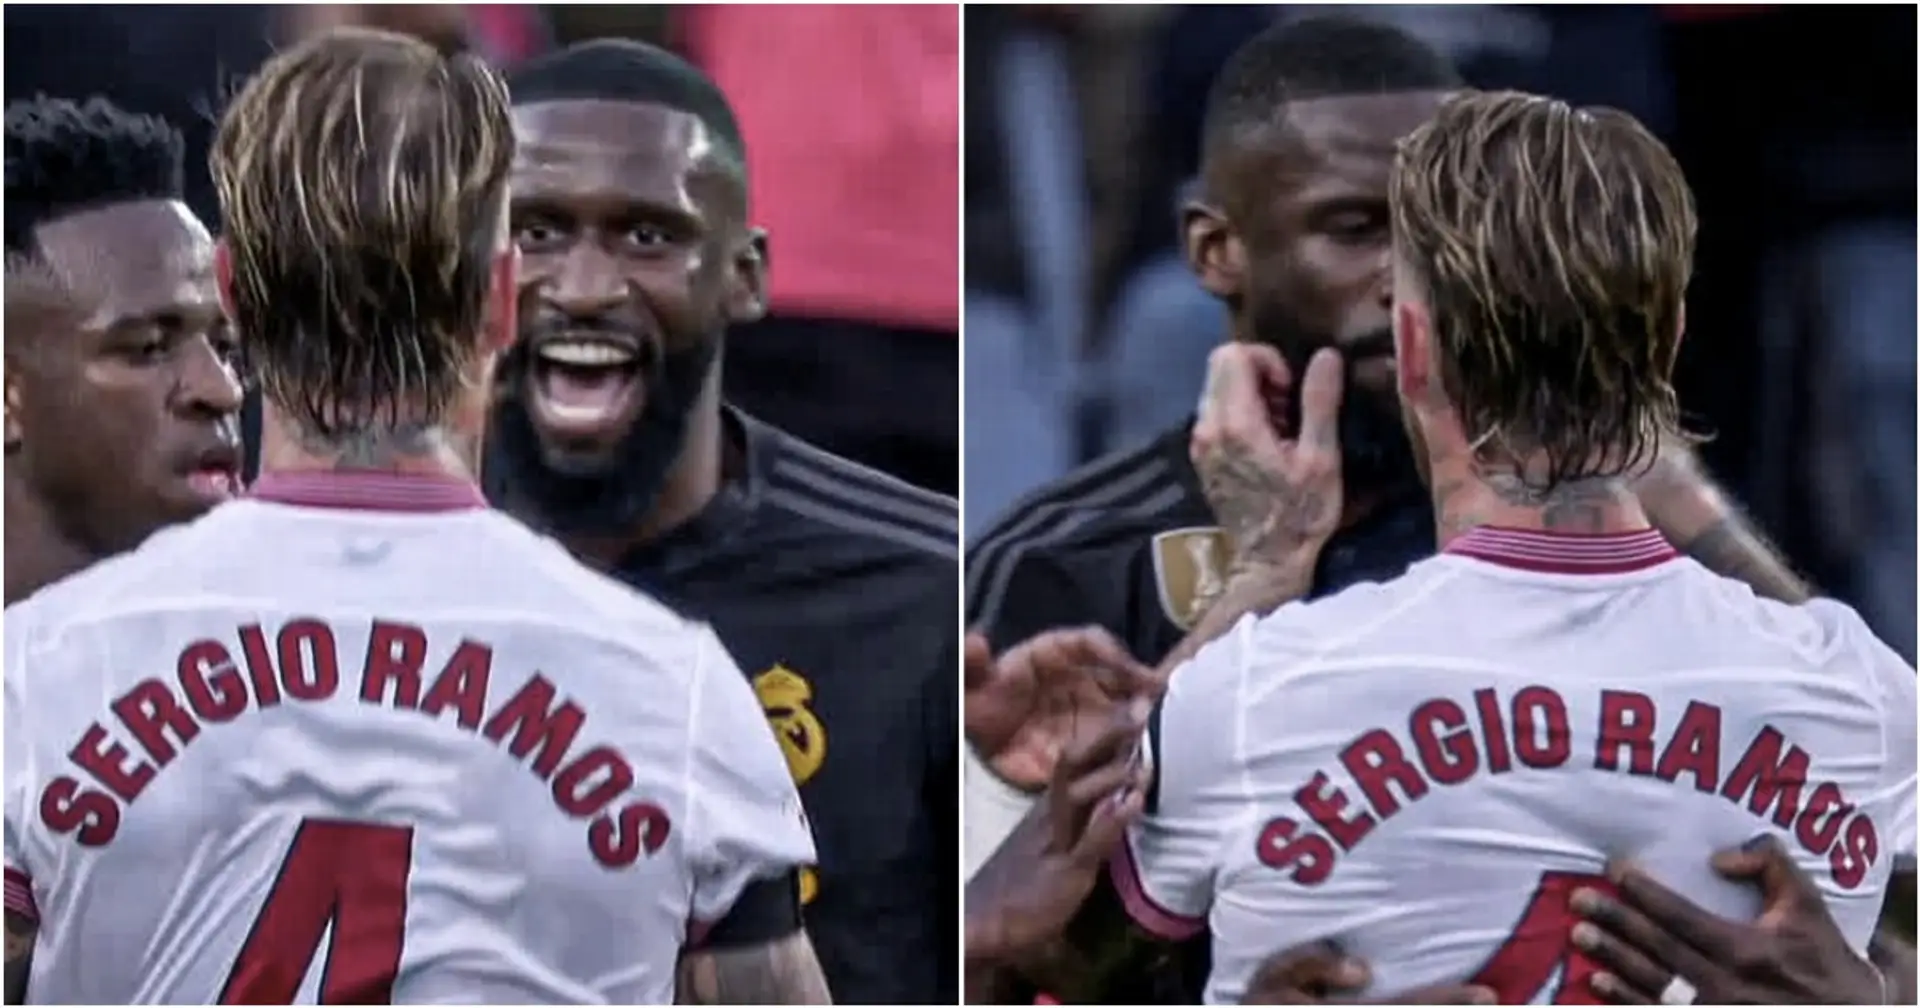 'You’re a cheap knockoff! - No, I'm the upgrade!': Fans react to Ramos vs Rudiger bust-up